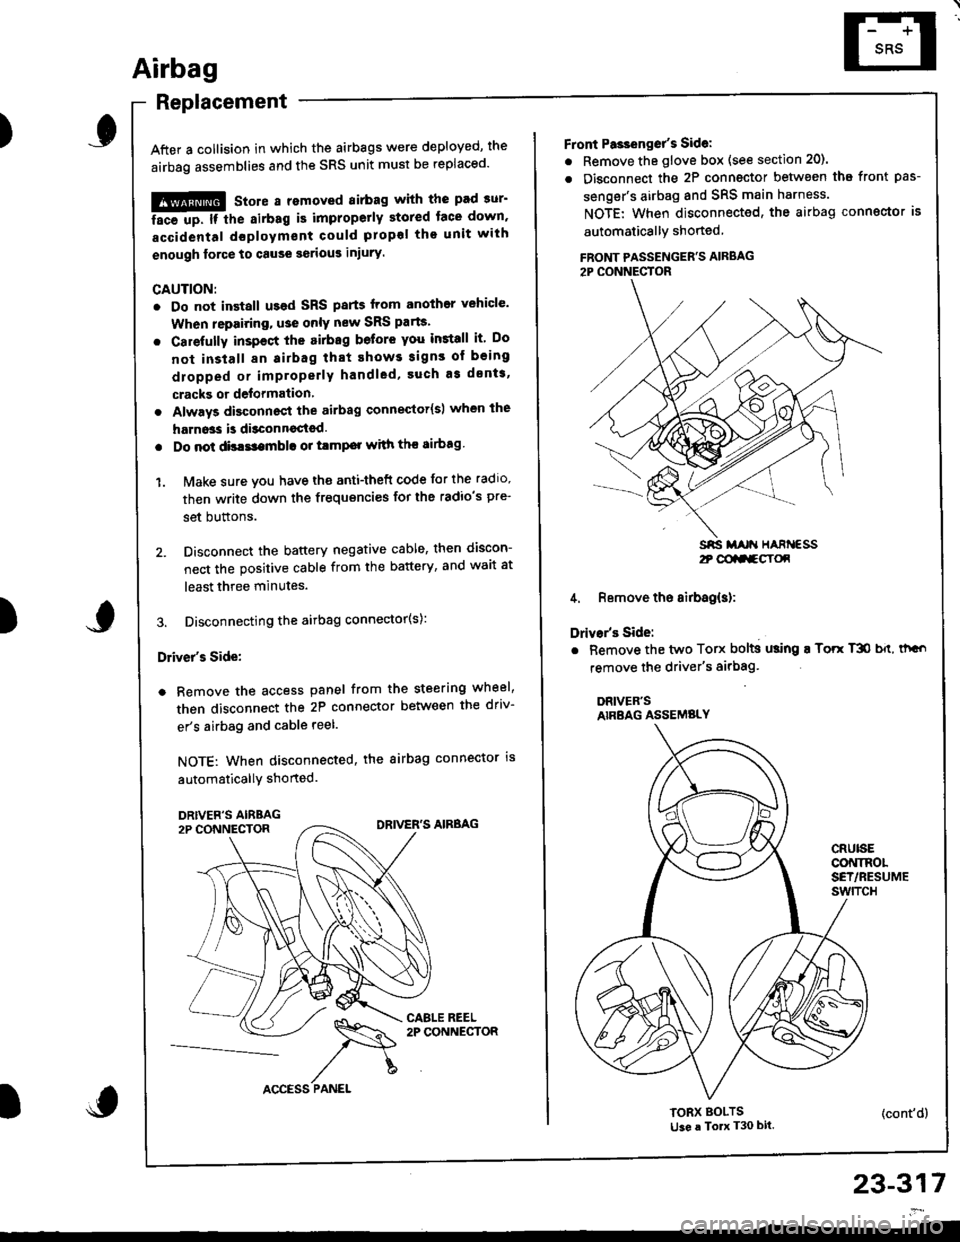 HONDA INTEGRA 1998 4.G Owners Manual )
Airbag
Replacement
After a collision in which the airbags were deployed, the
airbag assemblies and the SRS unit must be replaced
!!@ stole a removed sirbag with the pad sur
ii6--up. tt tle sirbag 